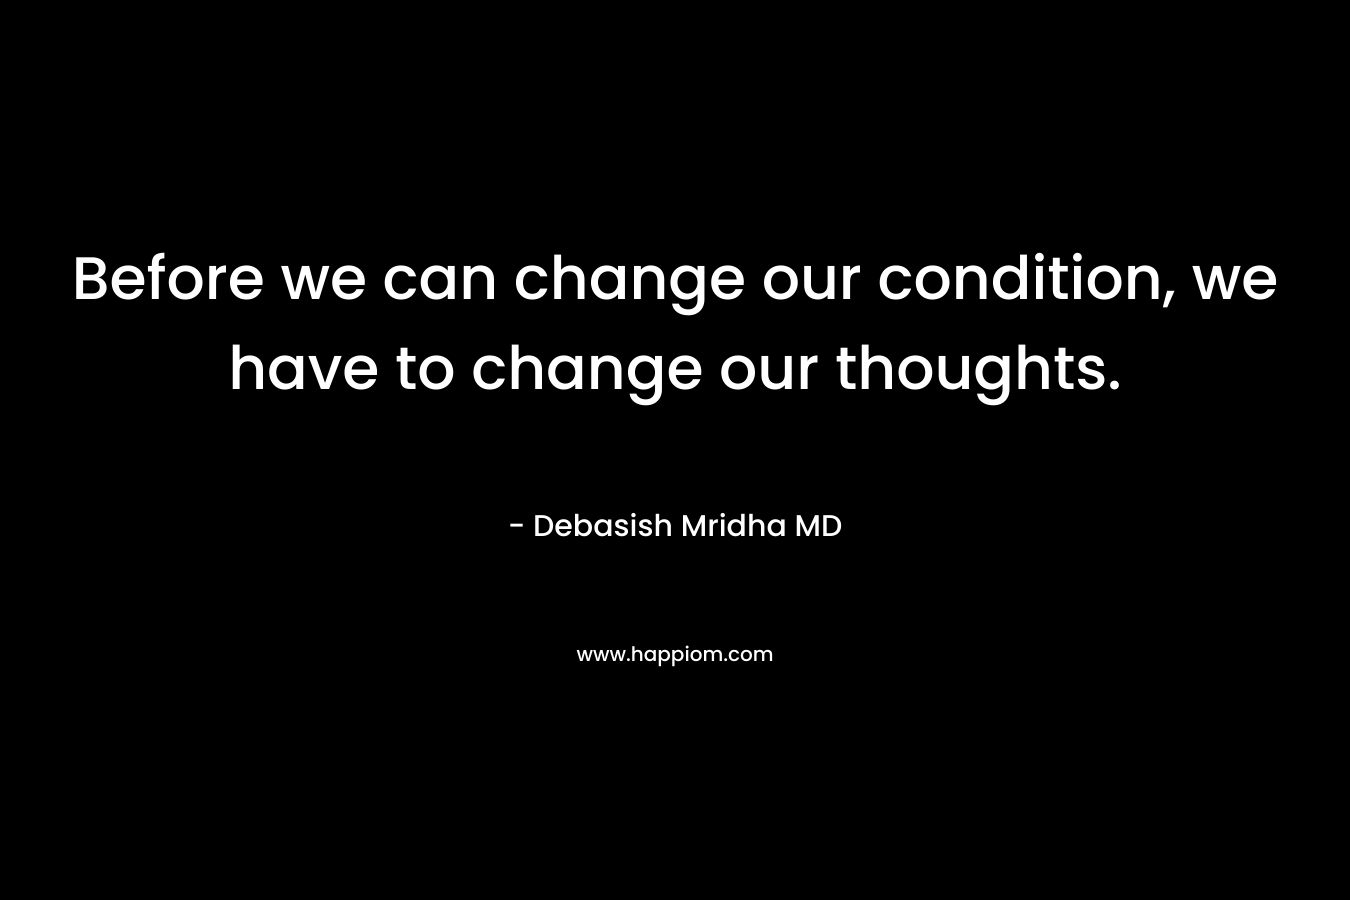 Before we can change our condition, we have to change our thoughts.